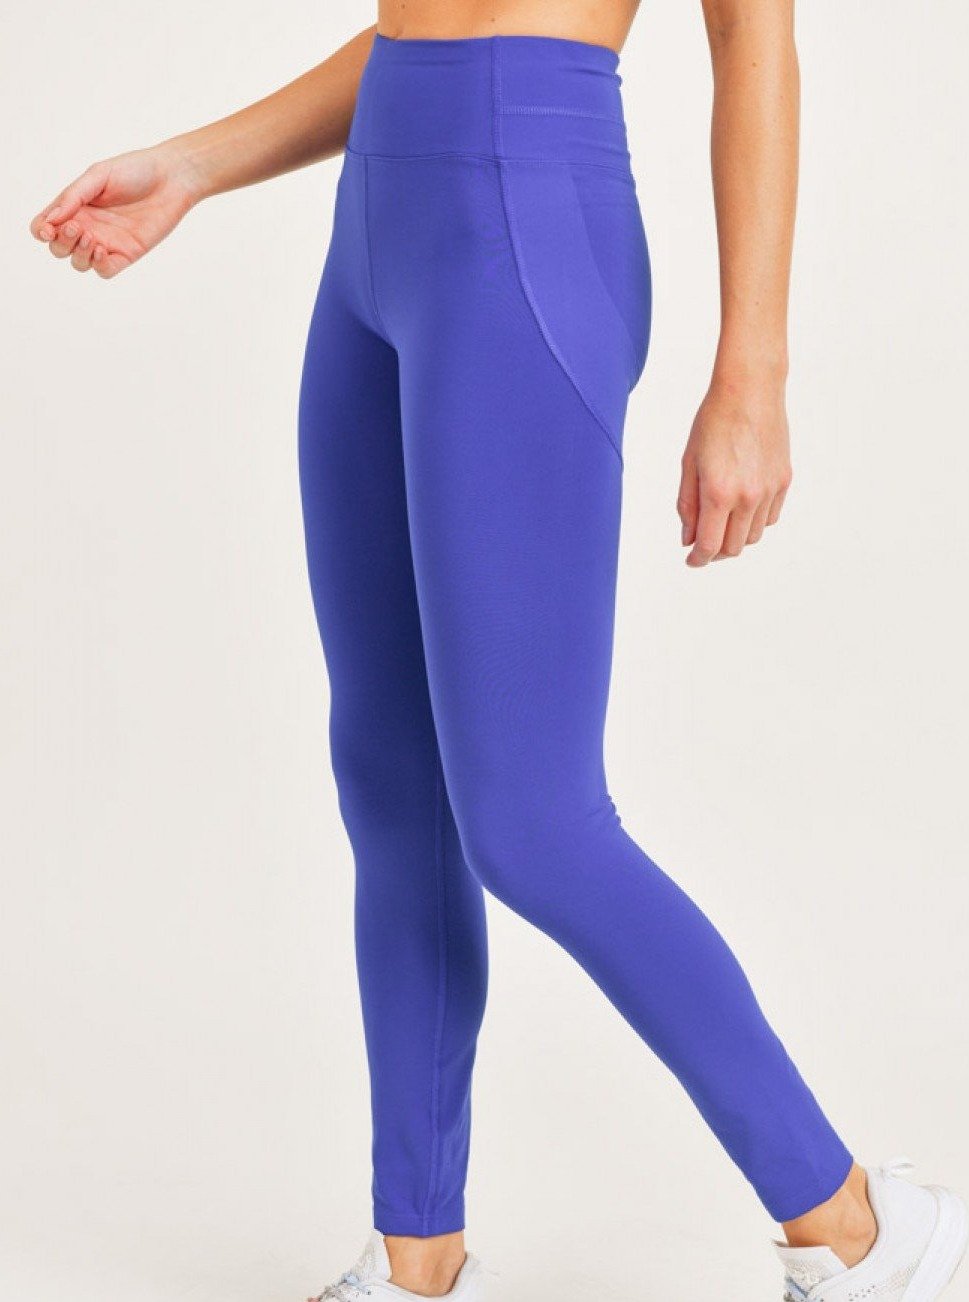 SSENSE Canada Exclusive Blue Ara String Leggings by A. ROEGE HOVE